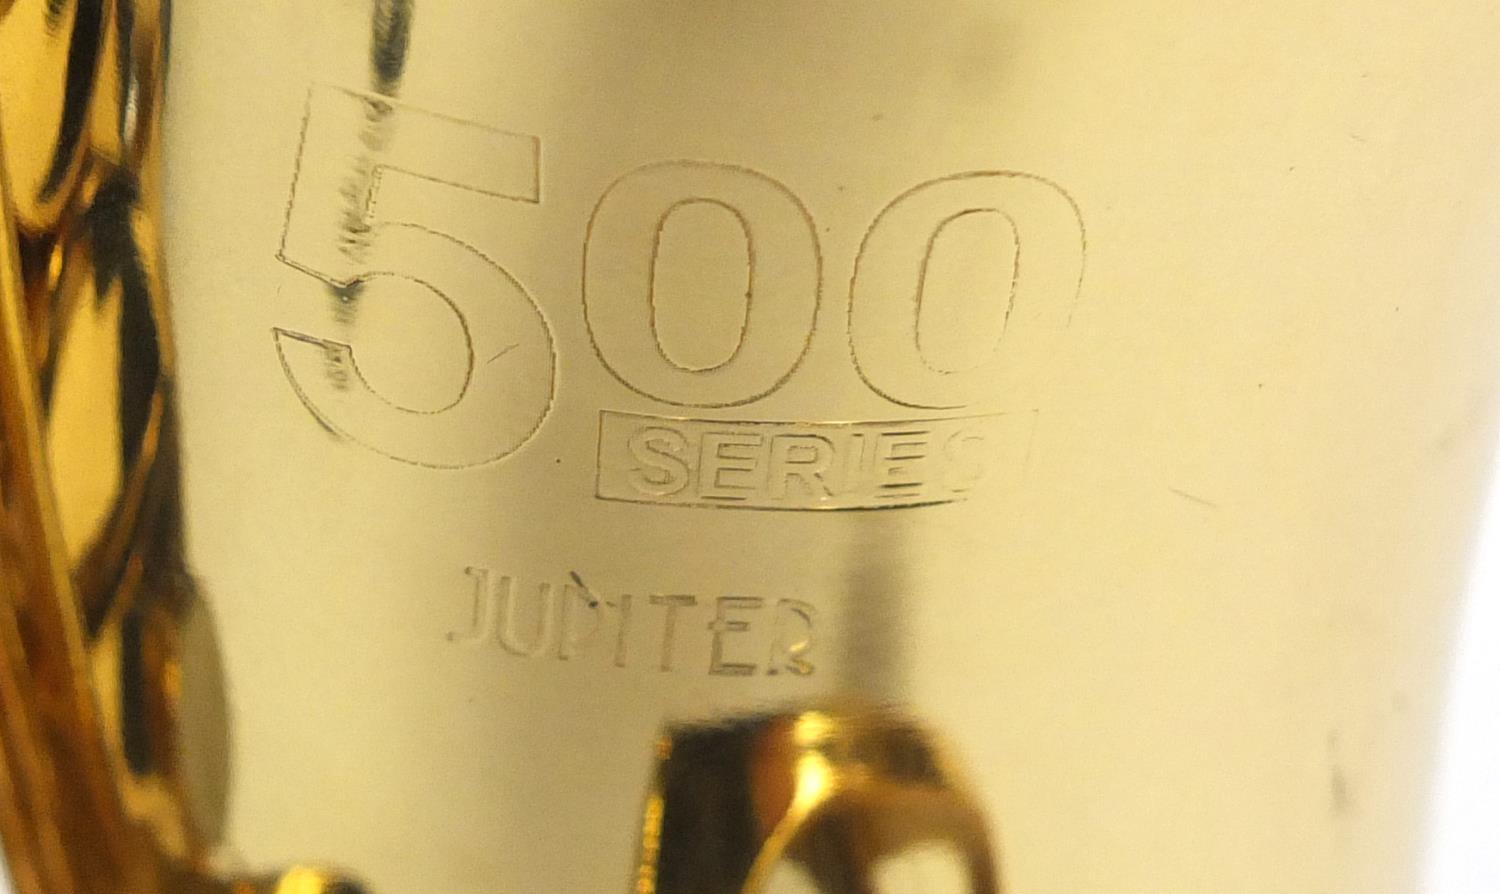 Jupiter 500 series brass saxophone, with Mother of Perl keys and fitted case, numbered 101116, - Image 7 of 10